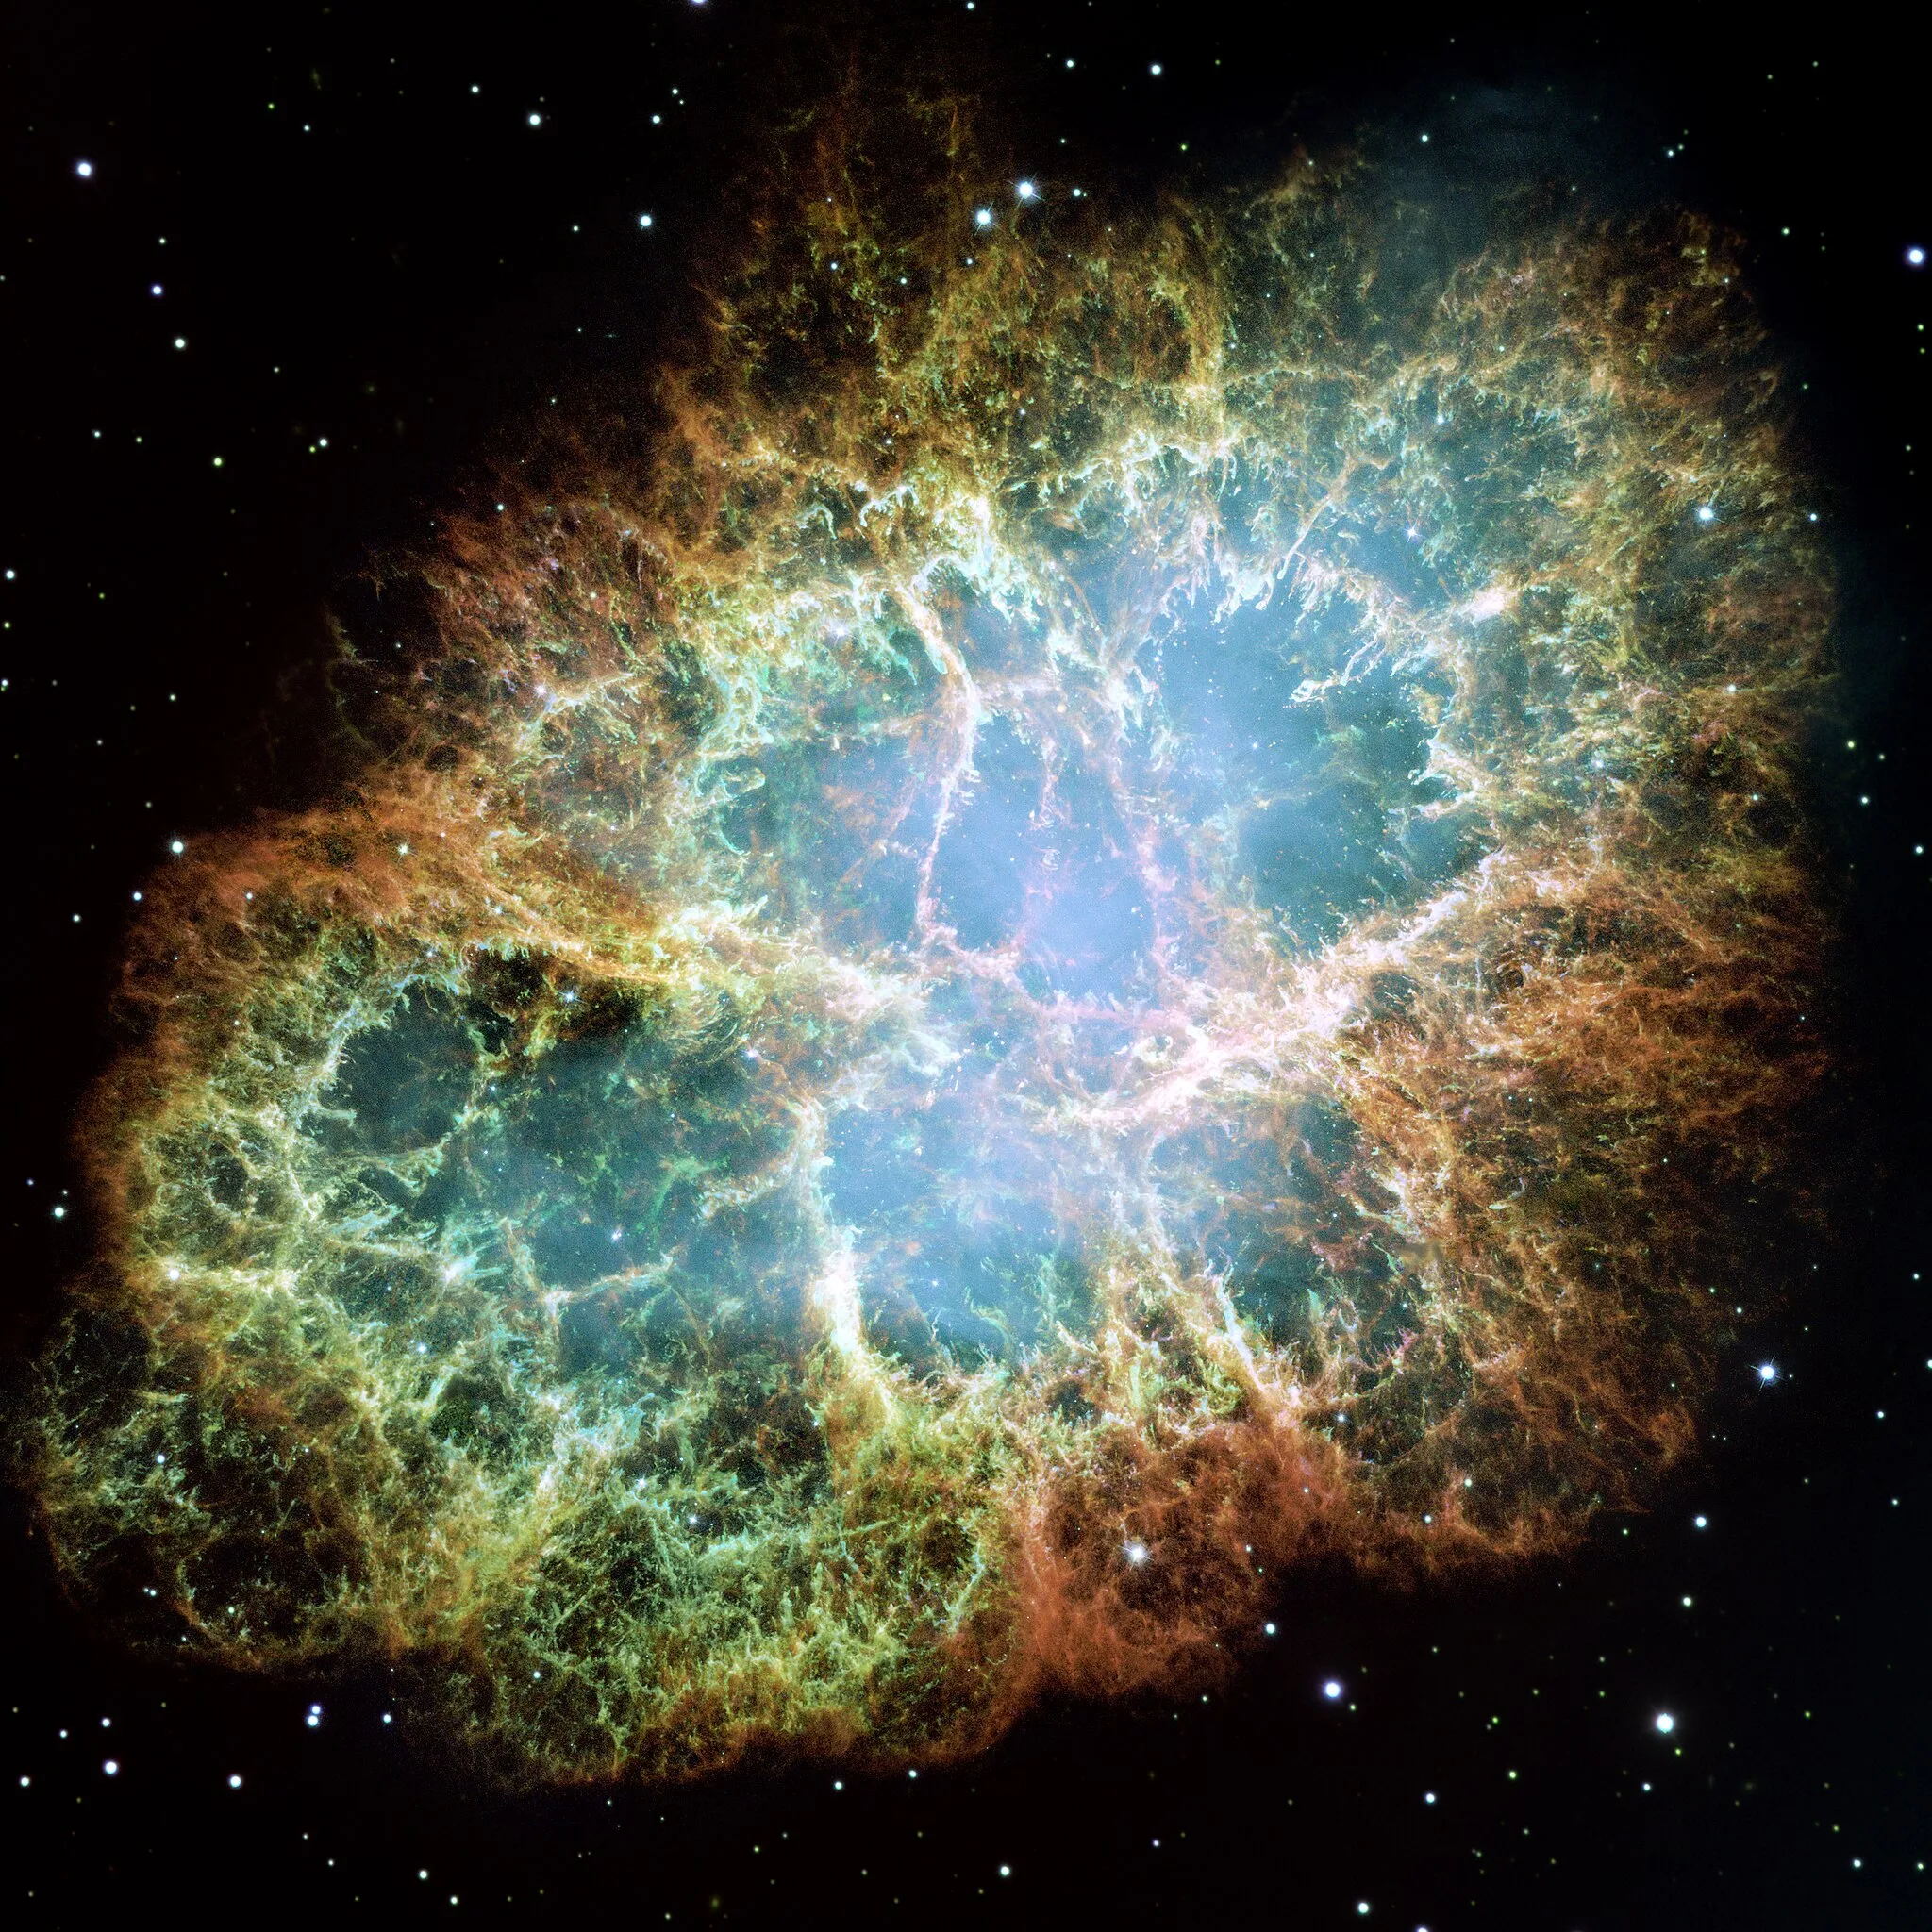 Photo showing: This is a mosaic image, one of the largest ever taken by NASA's Hubble Space Telescope, of the Crab Nebula, a six-light-year-wide expanding remnant of a star's supernova explosion. Japanese and Chinese astronomers recorded this violent event in 1054 CE.
The orange filaments are the tattered remains of the star and consist mostly of hydrogen. The rapidly spinning neutron star embedded in the center of the nebula is the dynamo powering the nebula's eerie interior bluish glow. The blue light comes from electrons whirling at nearly the speed of light around magnetic field lines from the neutron star. The neutron star, like a lighthouse, ejects twin beams of radiation that appear to pulse 30 times a second due to the neutron star's rotation. A neutron star is the crushed ultra-dense core of the exploded star.
The Crab Nebula derived its name from its appearance in a drawing made by Irish astronomer Lord Rosse in 1844, using a 36-inch telescope. When viewed by Hubble, as well as by large ground-based telescopes such as the European Southern Observatory's Very Large Telescope, the Crab Nebula takes on a more detailed appearance that yields clues into the spectacular demise of a star, 6,500 light-years away.

The newly composed image was assembled from 24 individual Wide Field and Planetary Camera 2 exposures taken in October 1999, January 2000, and December 2000. The colors in the image indicate the different elements that were expelled during the explosion. Blue in the filaments in the outer part of the nebula represents neutral oxygen, green is singly-ionized sulfur, and red indicates doubly-ionized oxygen.